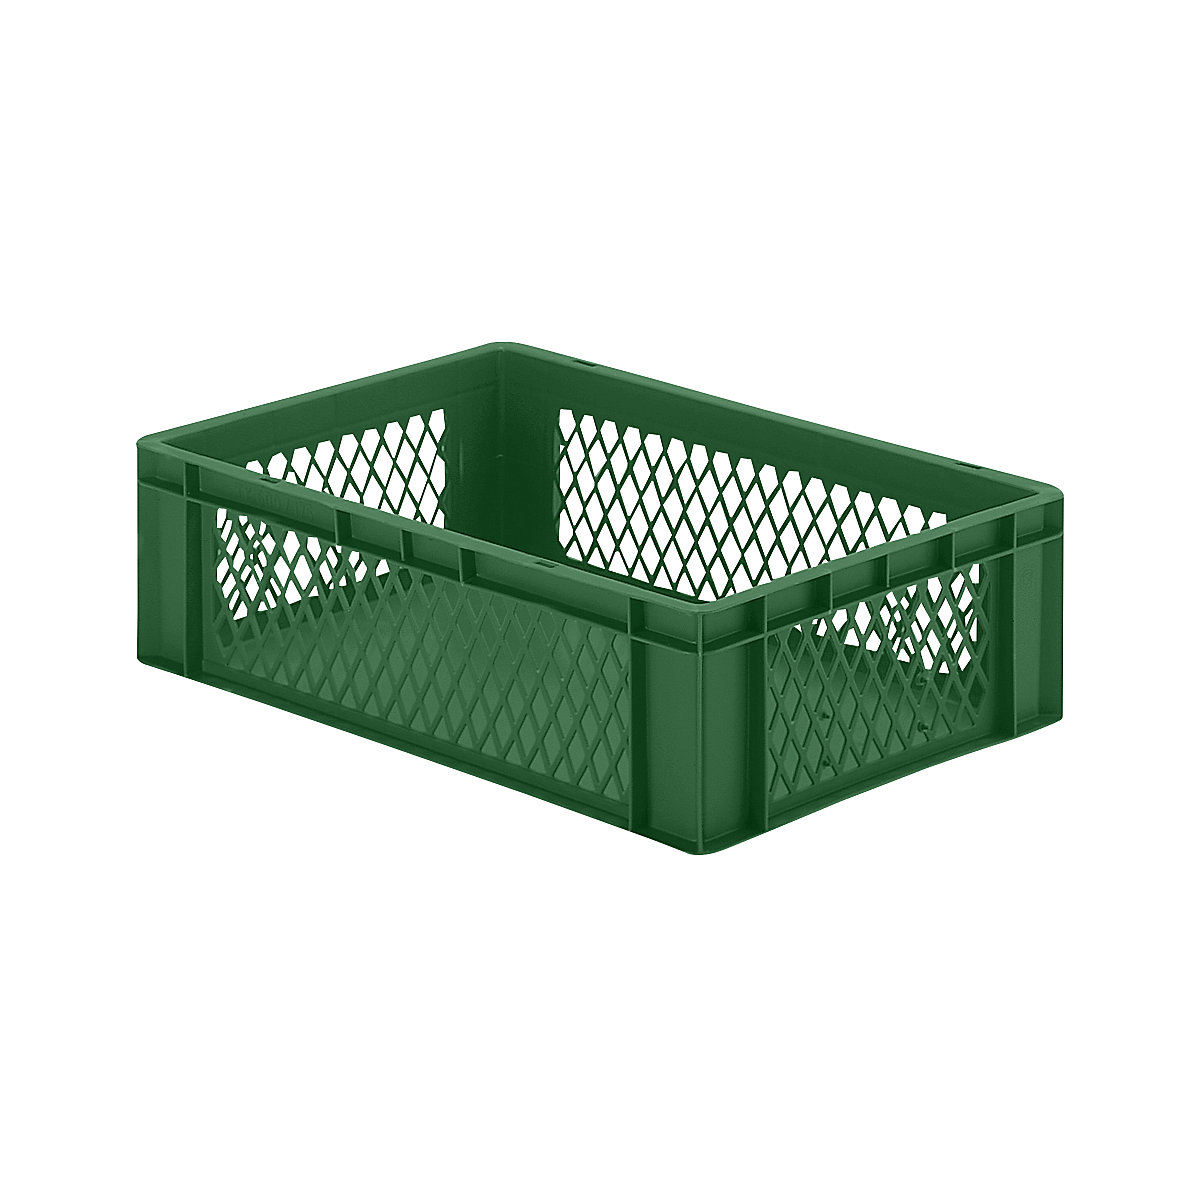 Euro stacking container, perforated walls, closed base, LxWxH 600 x 400 x 175 mm, green, pack of 5